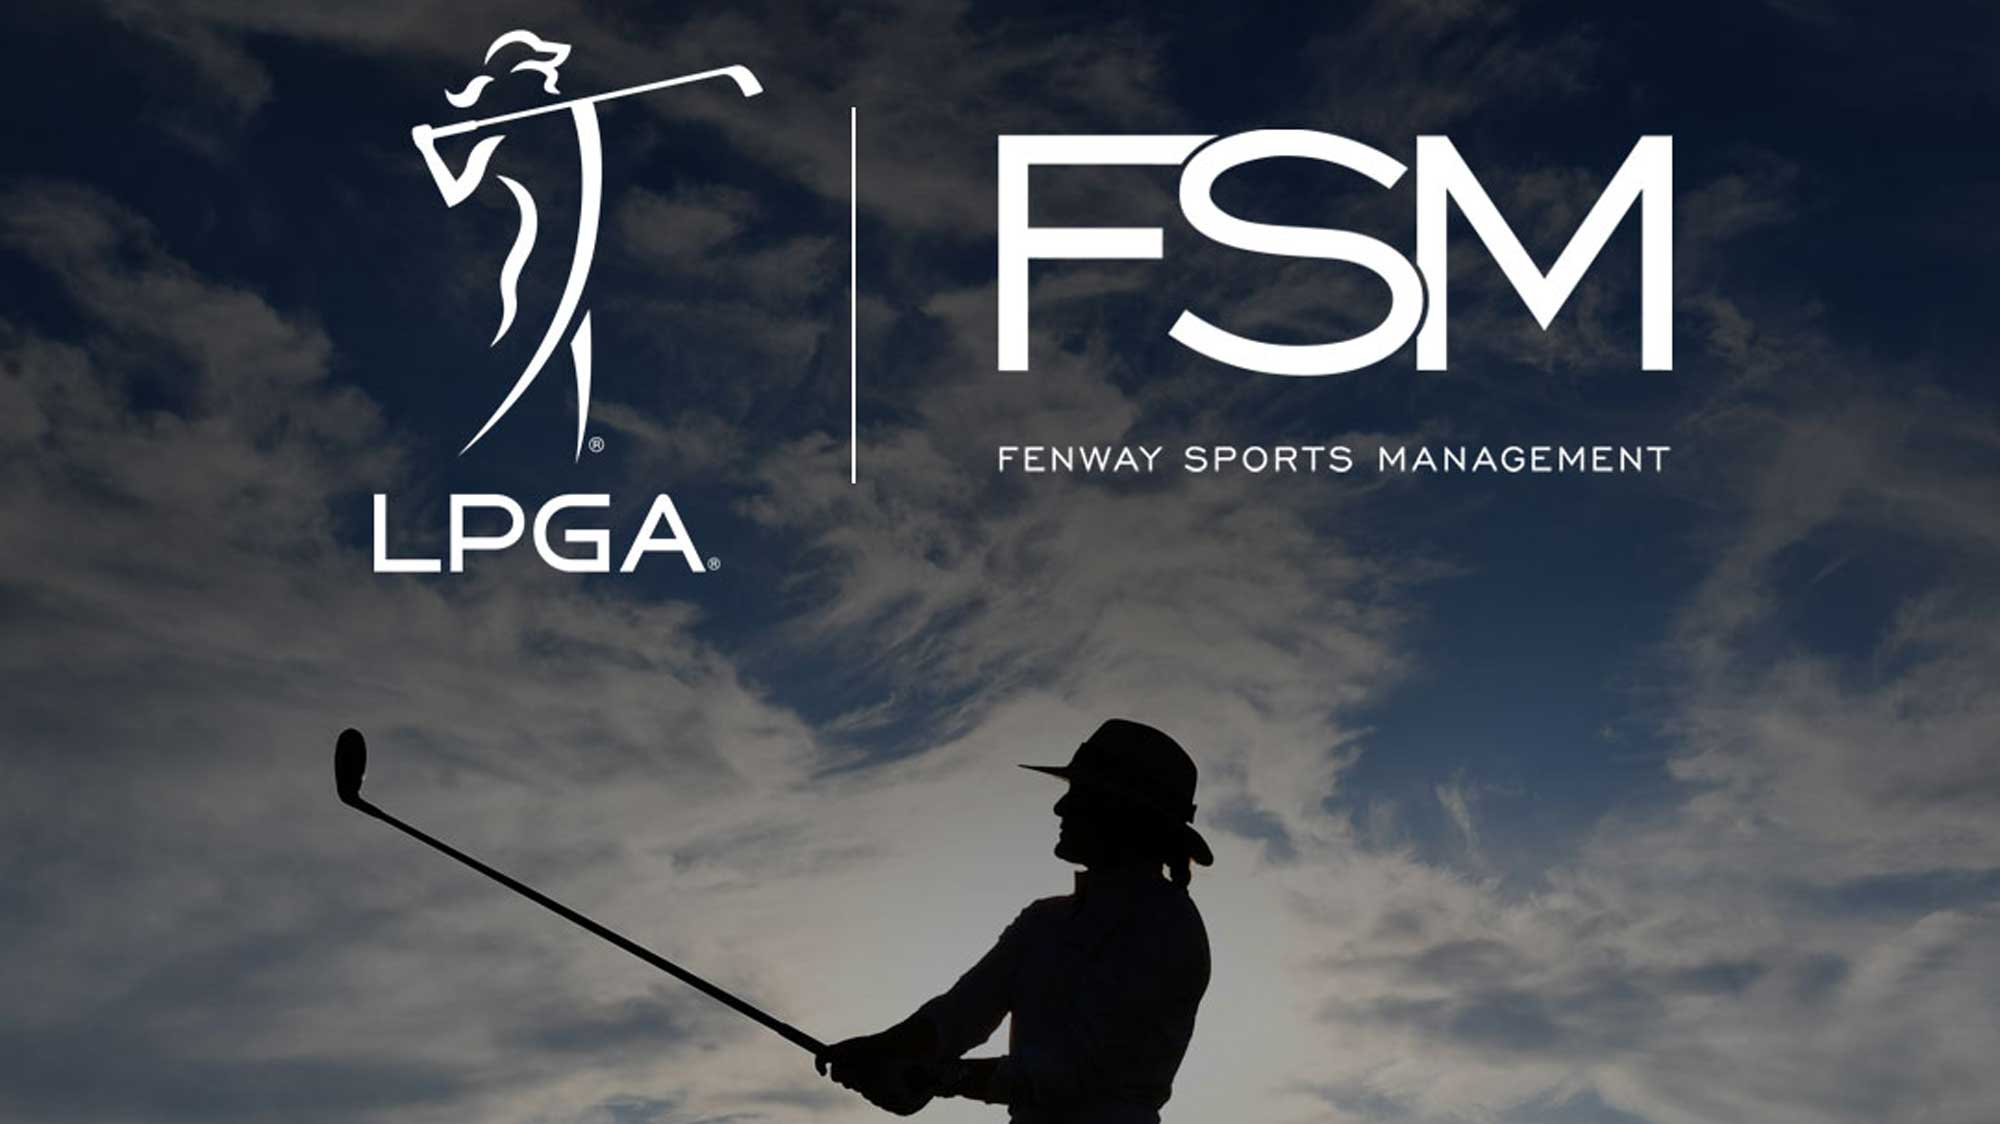 Fenway Sports Management teams up with LPGA to increase global